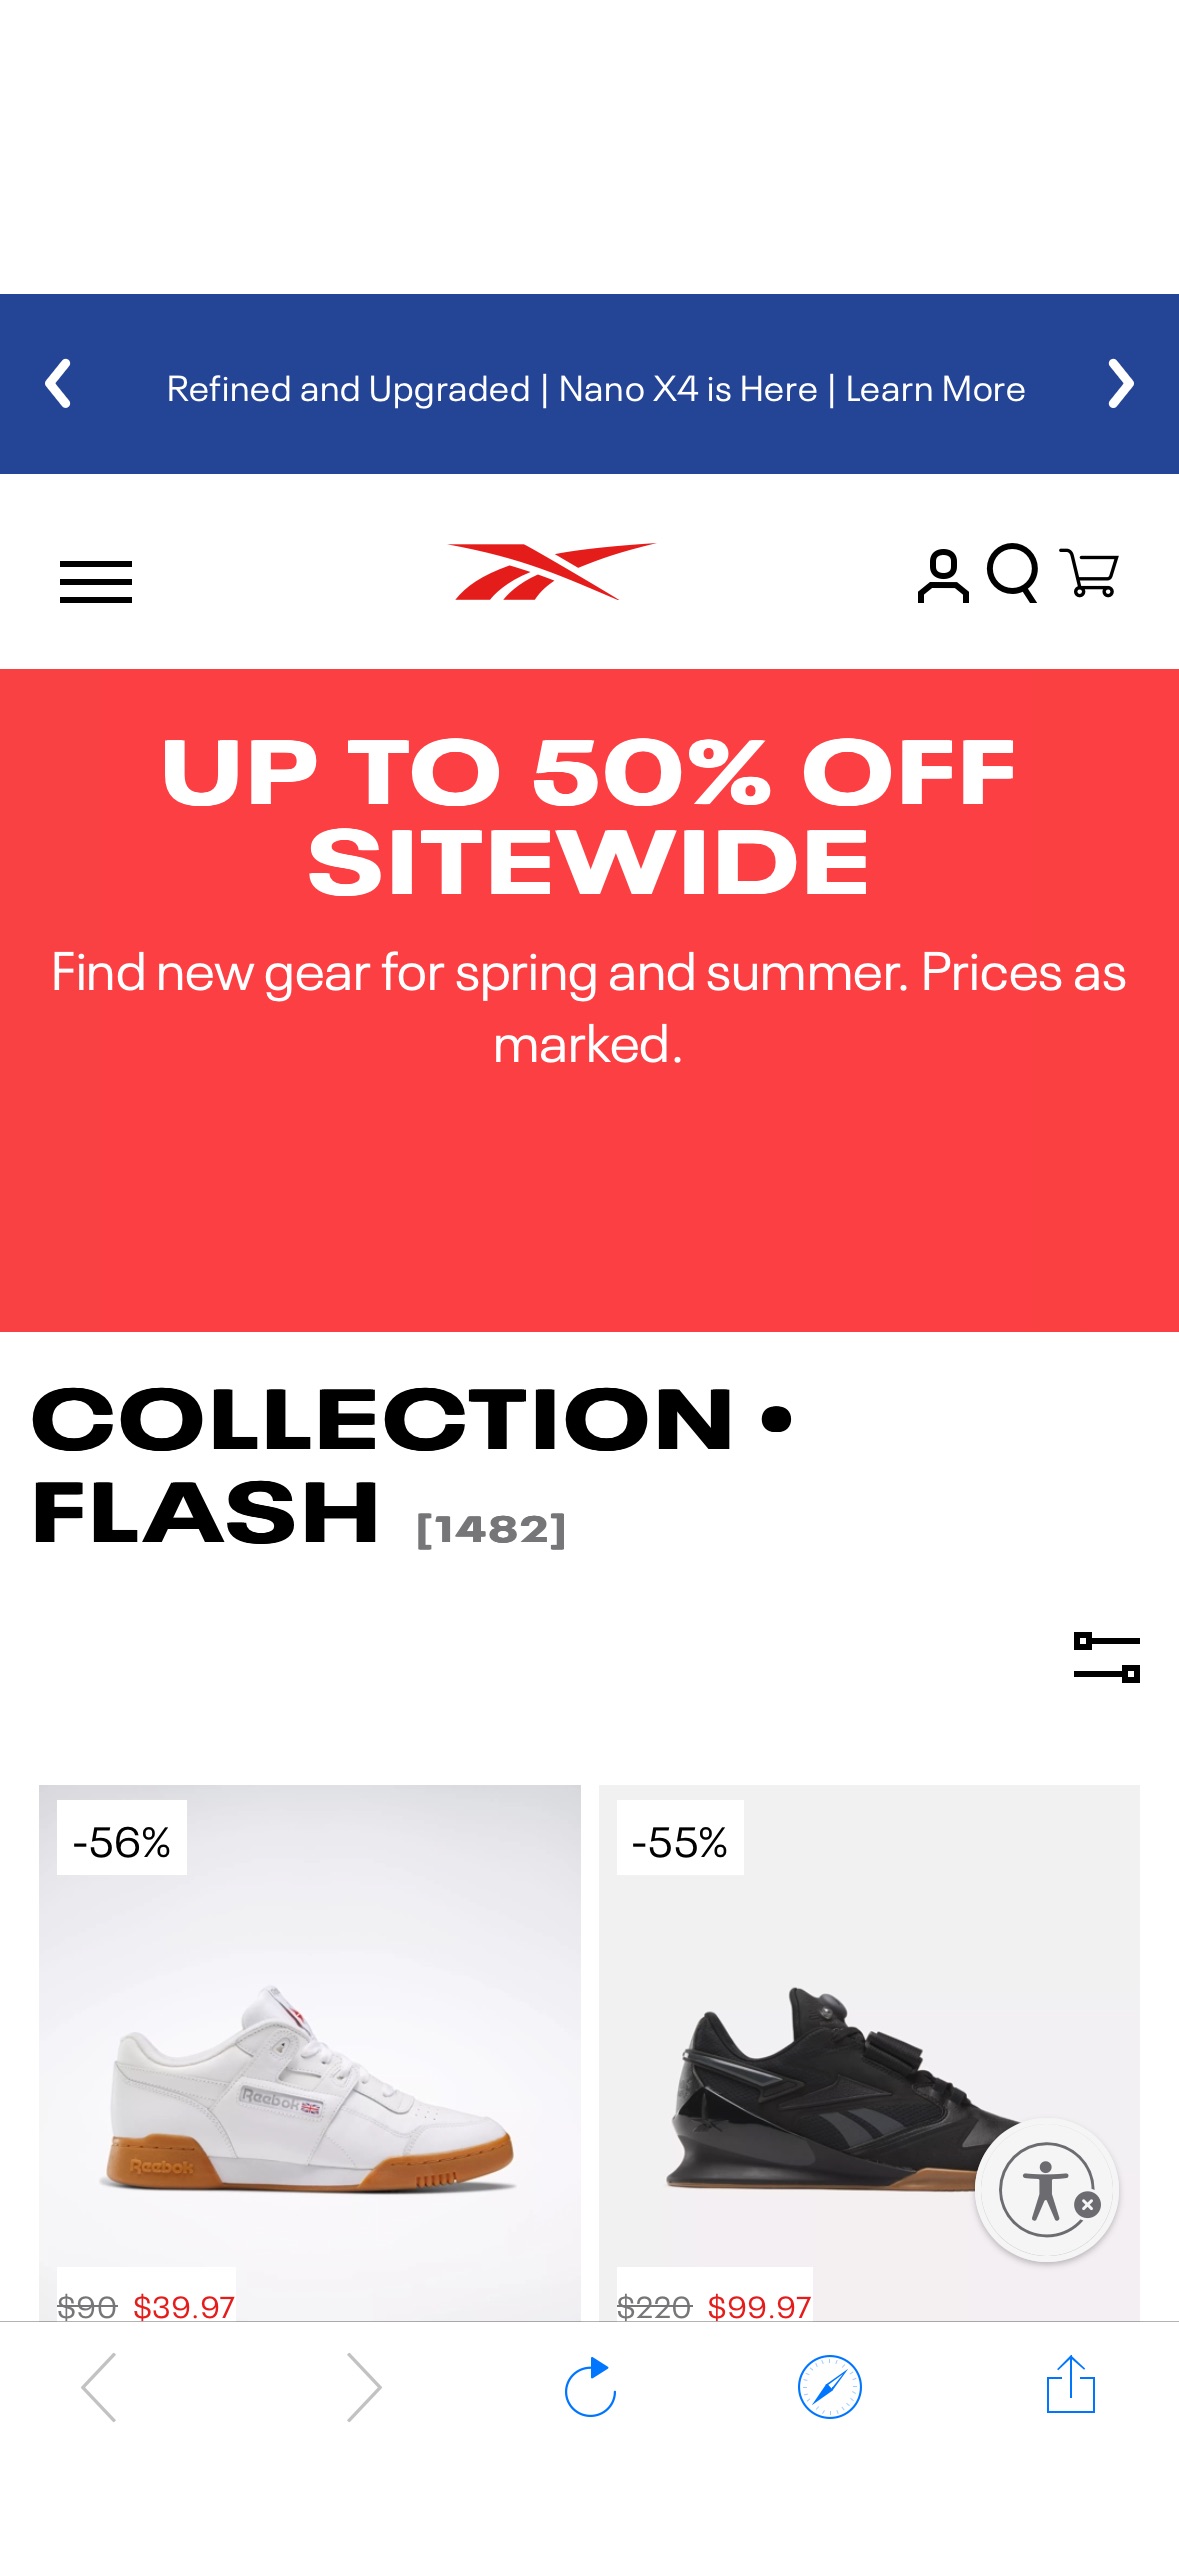 UP TO 50% OFF SITEWIDE